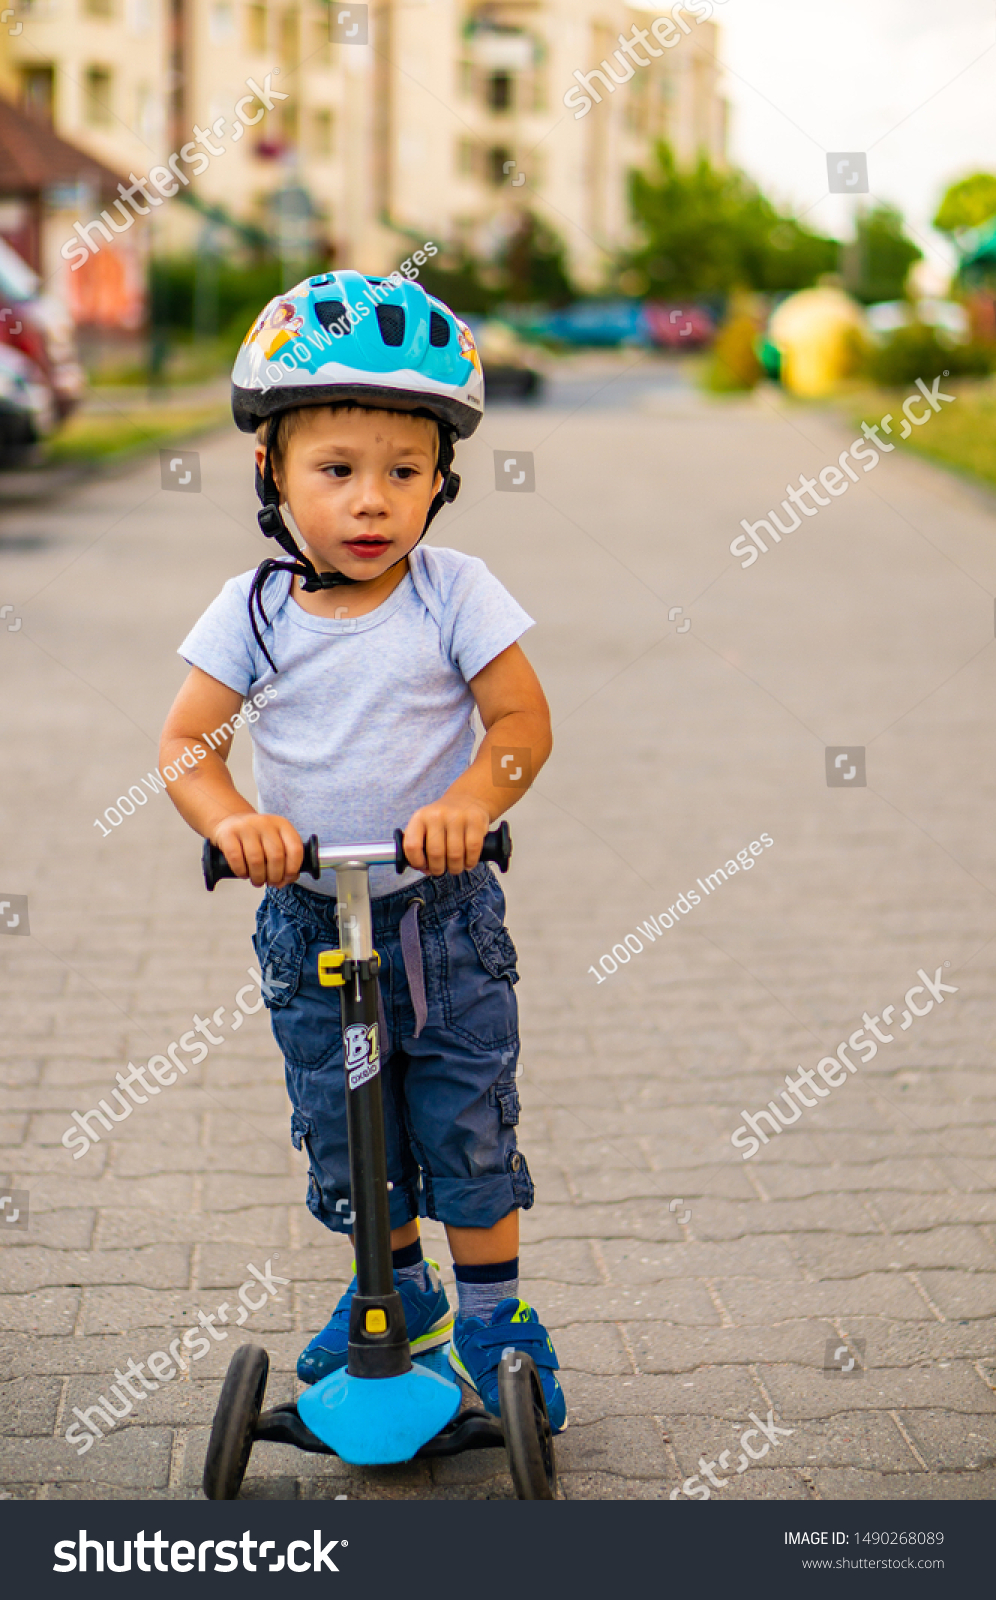 Toddler Boy Safety Helmet On Three People Stock Image 1490268089